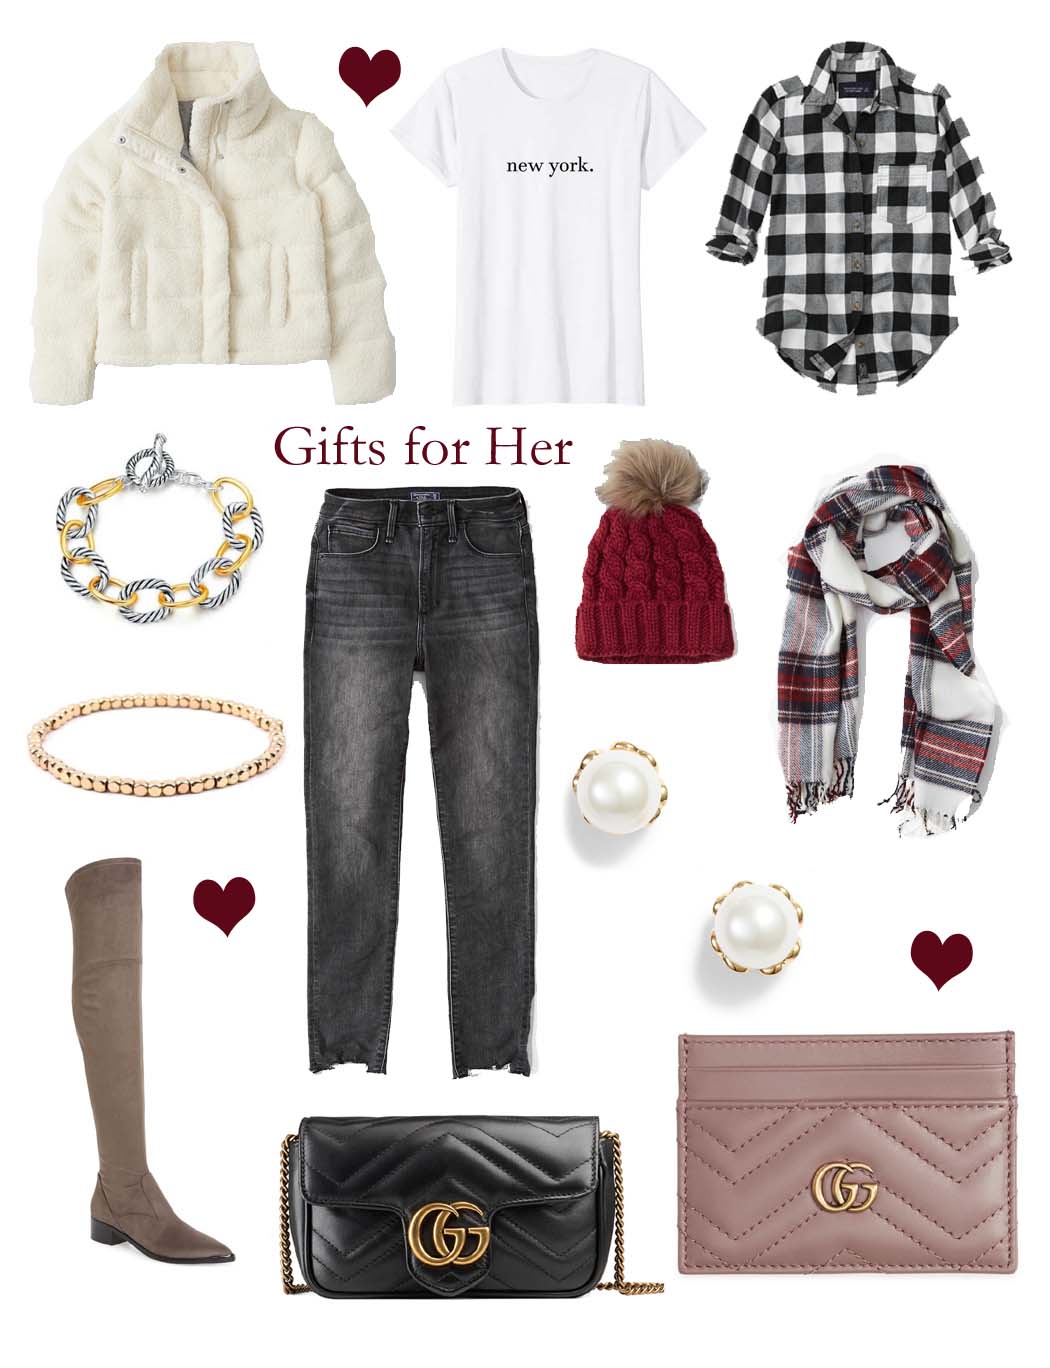 Holiday Gift Guide for Her